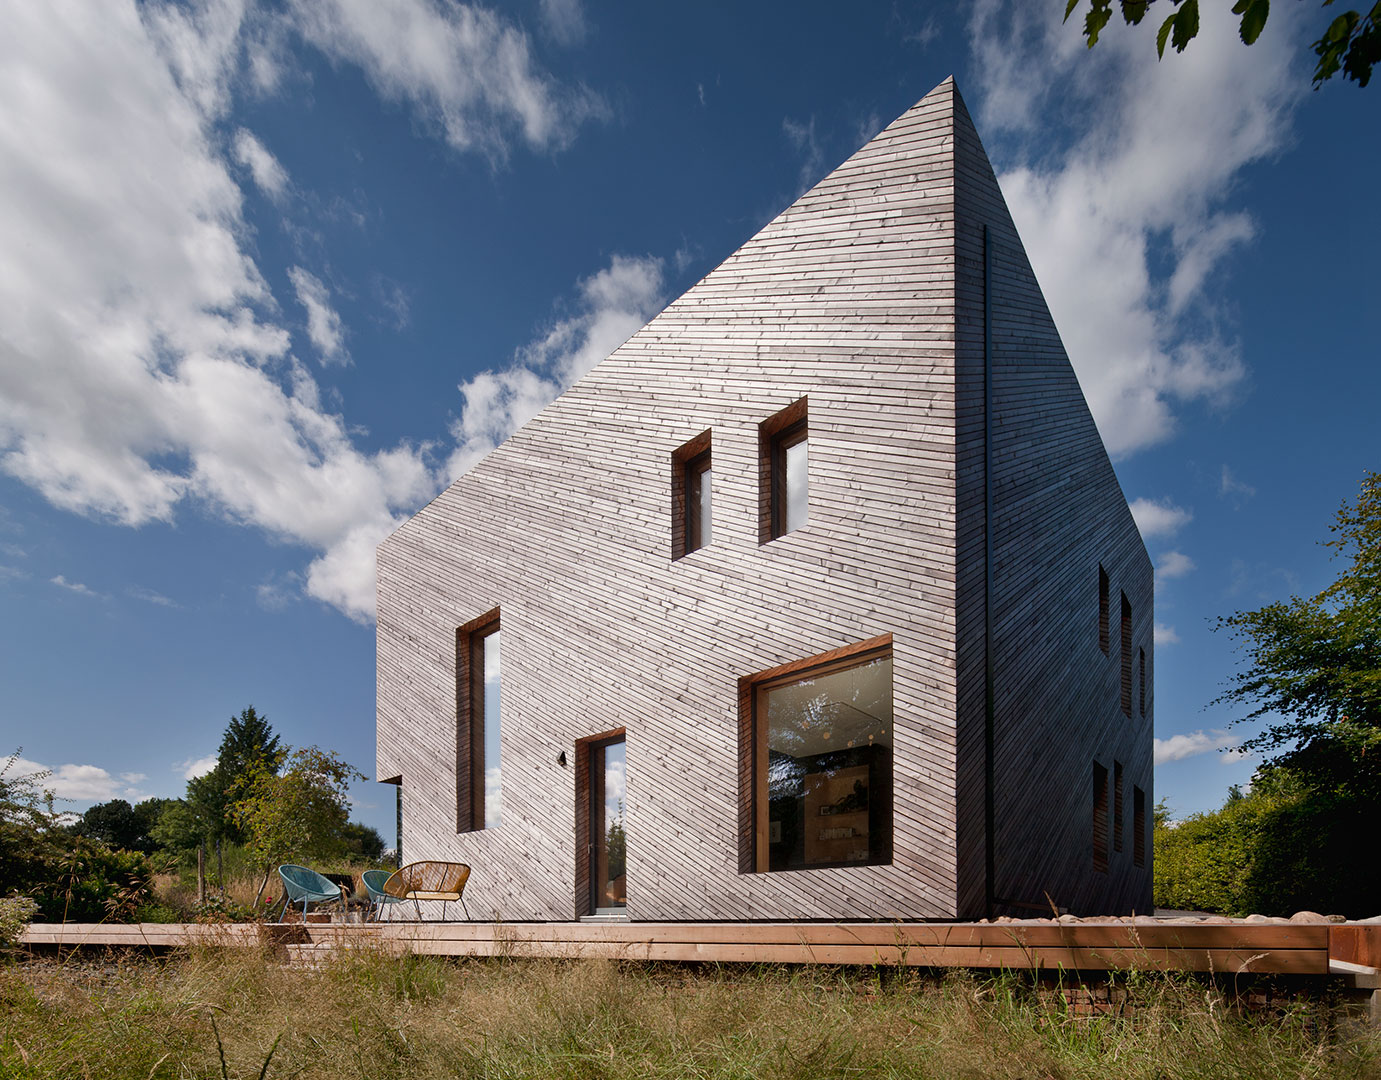 Top Passive House Tweets of the Last Week - March 15